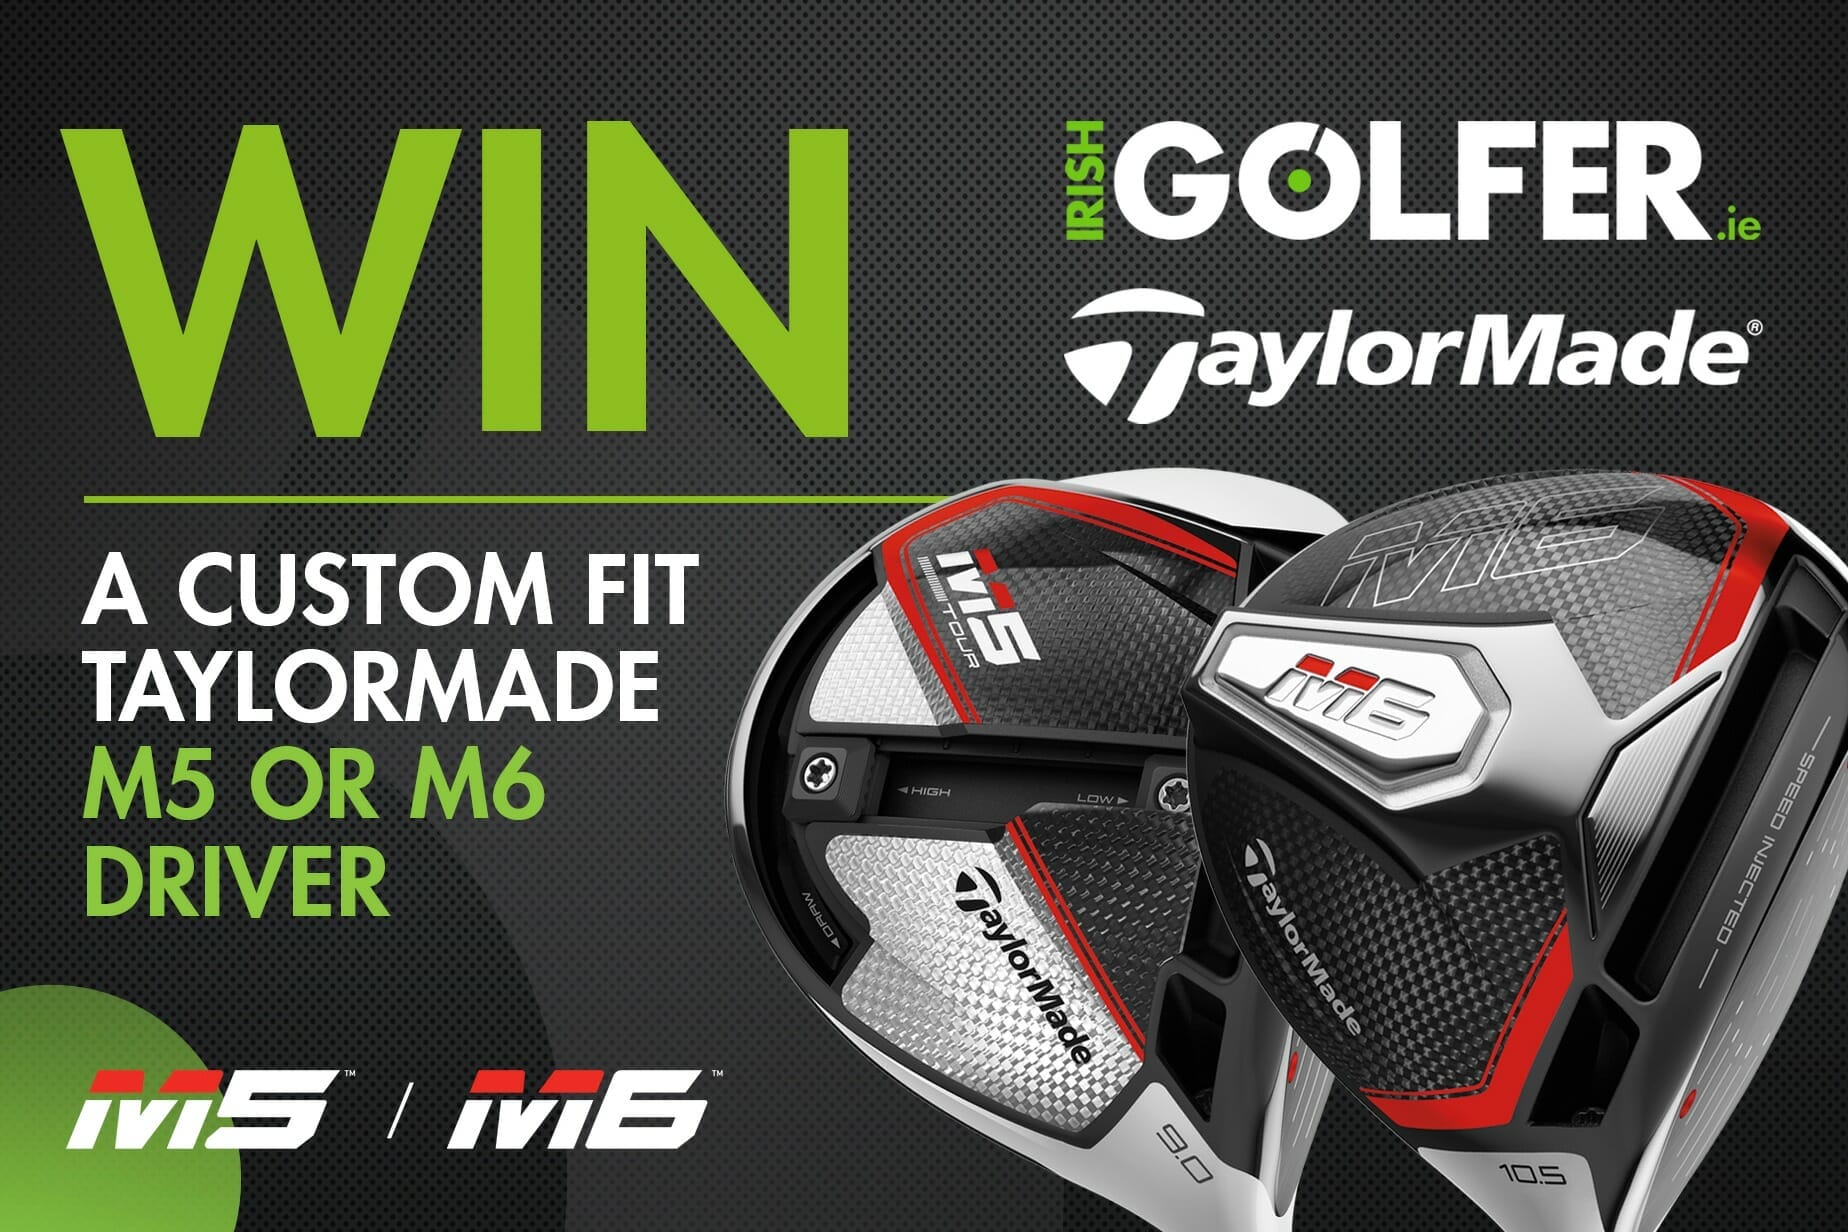 WIN one of two custom fit TaylorMade M5 / M6 Drivers